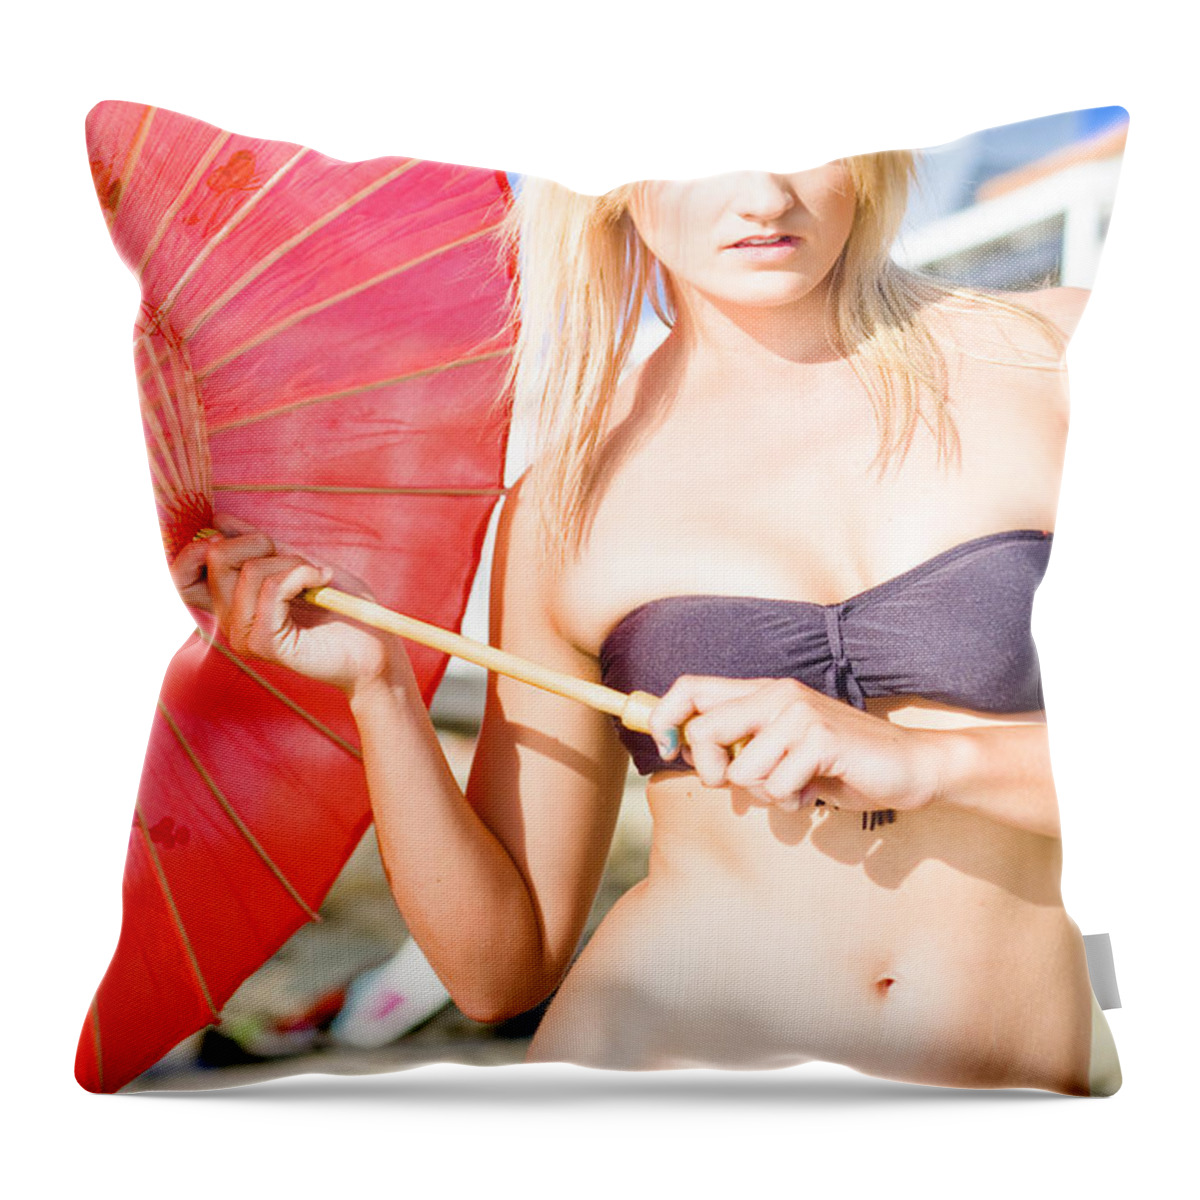 Bikini Throw Pillow featuring the photograph Protection From The Sun by Jorgo Photography